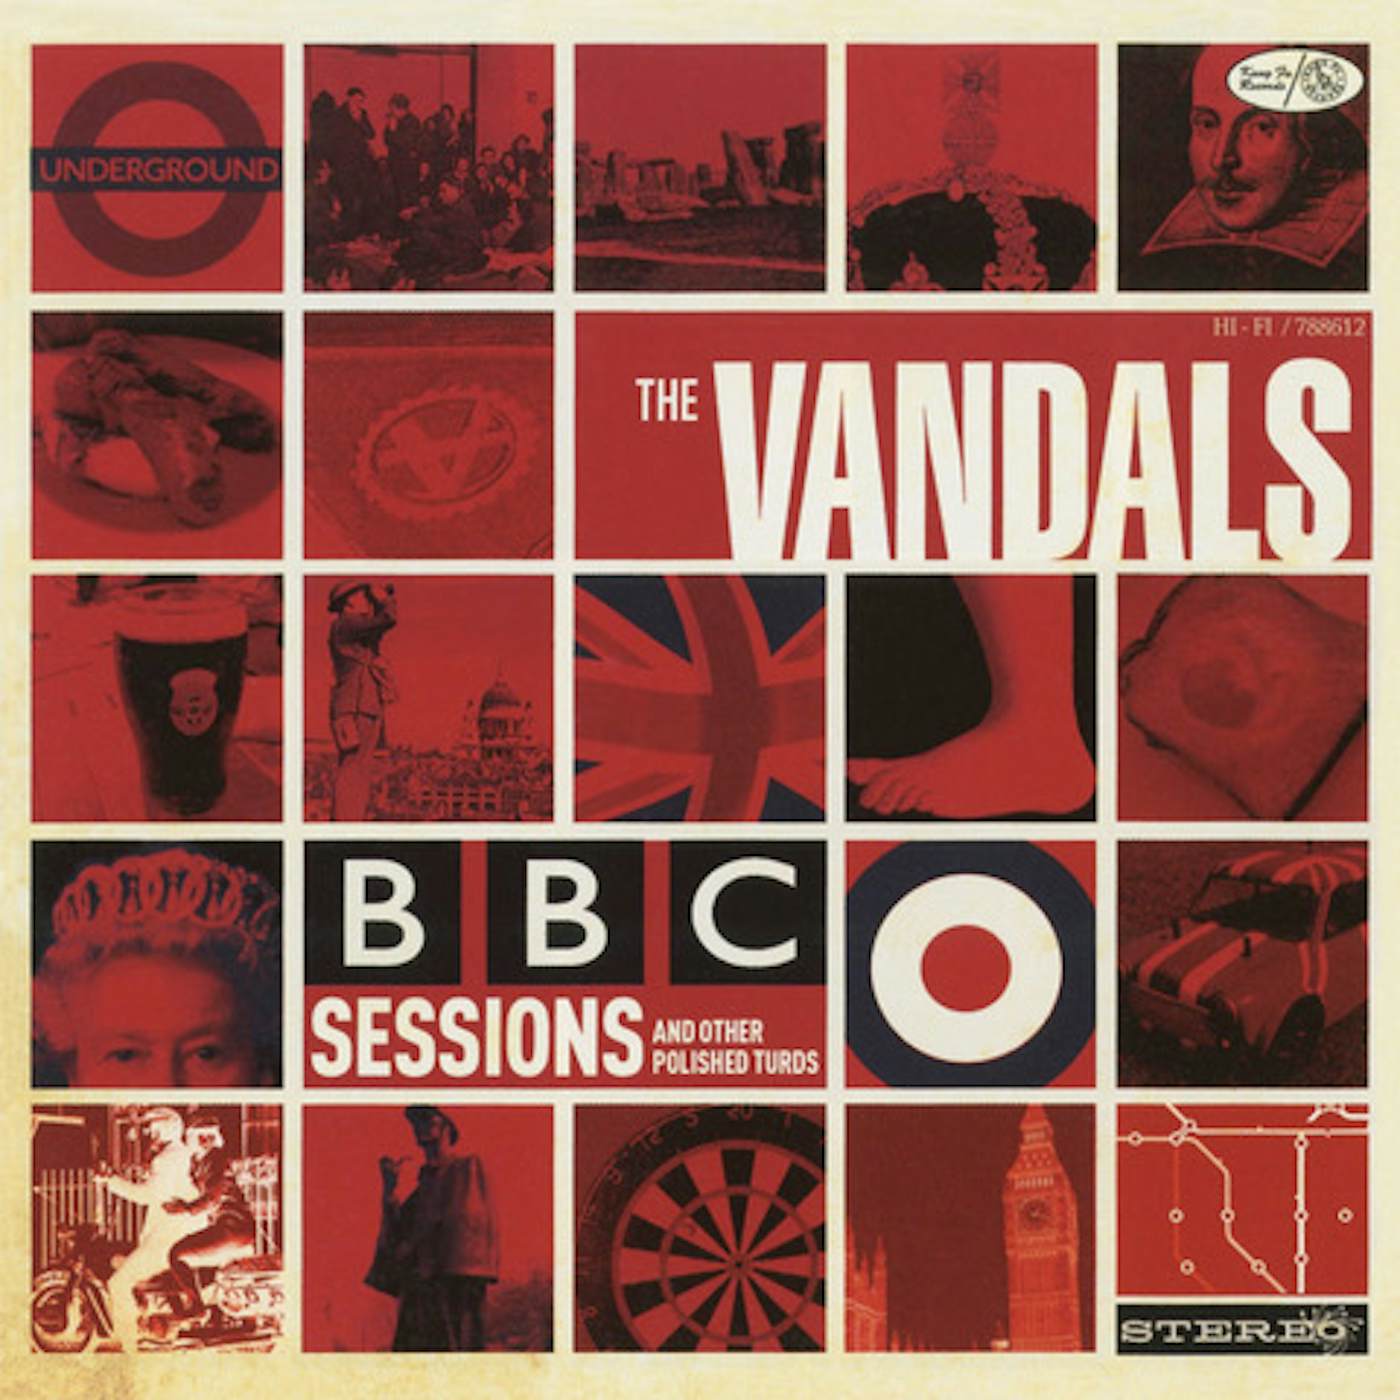 The Vandals  BBC SESSIONS & OTHER POLISHED TURDS Vinyl Record